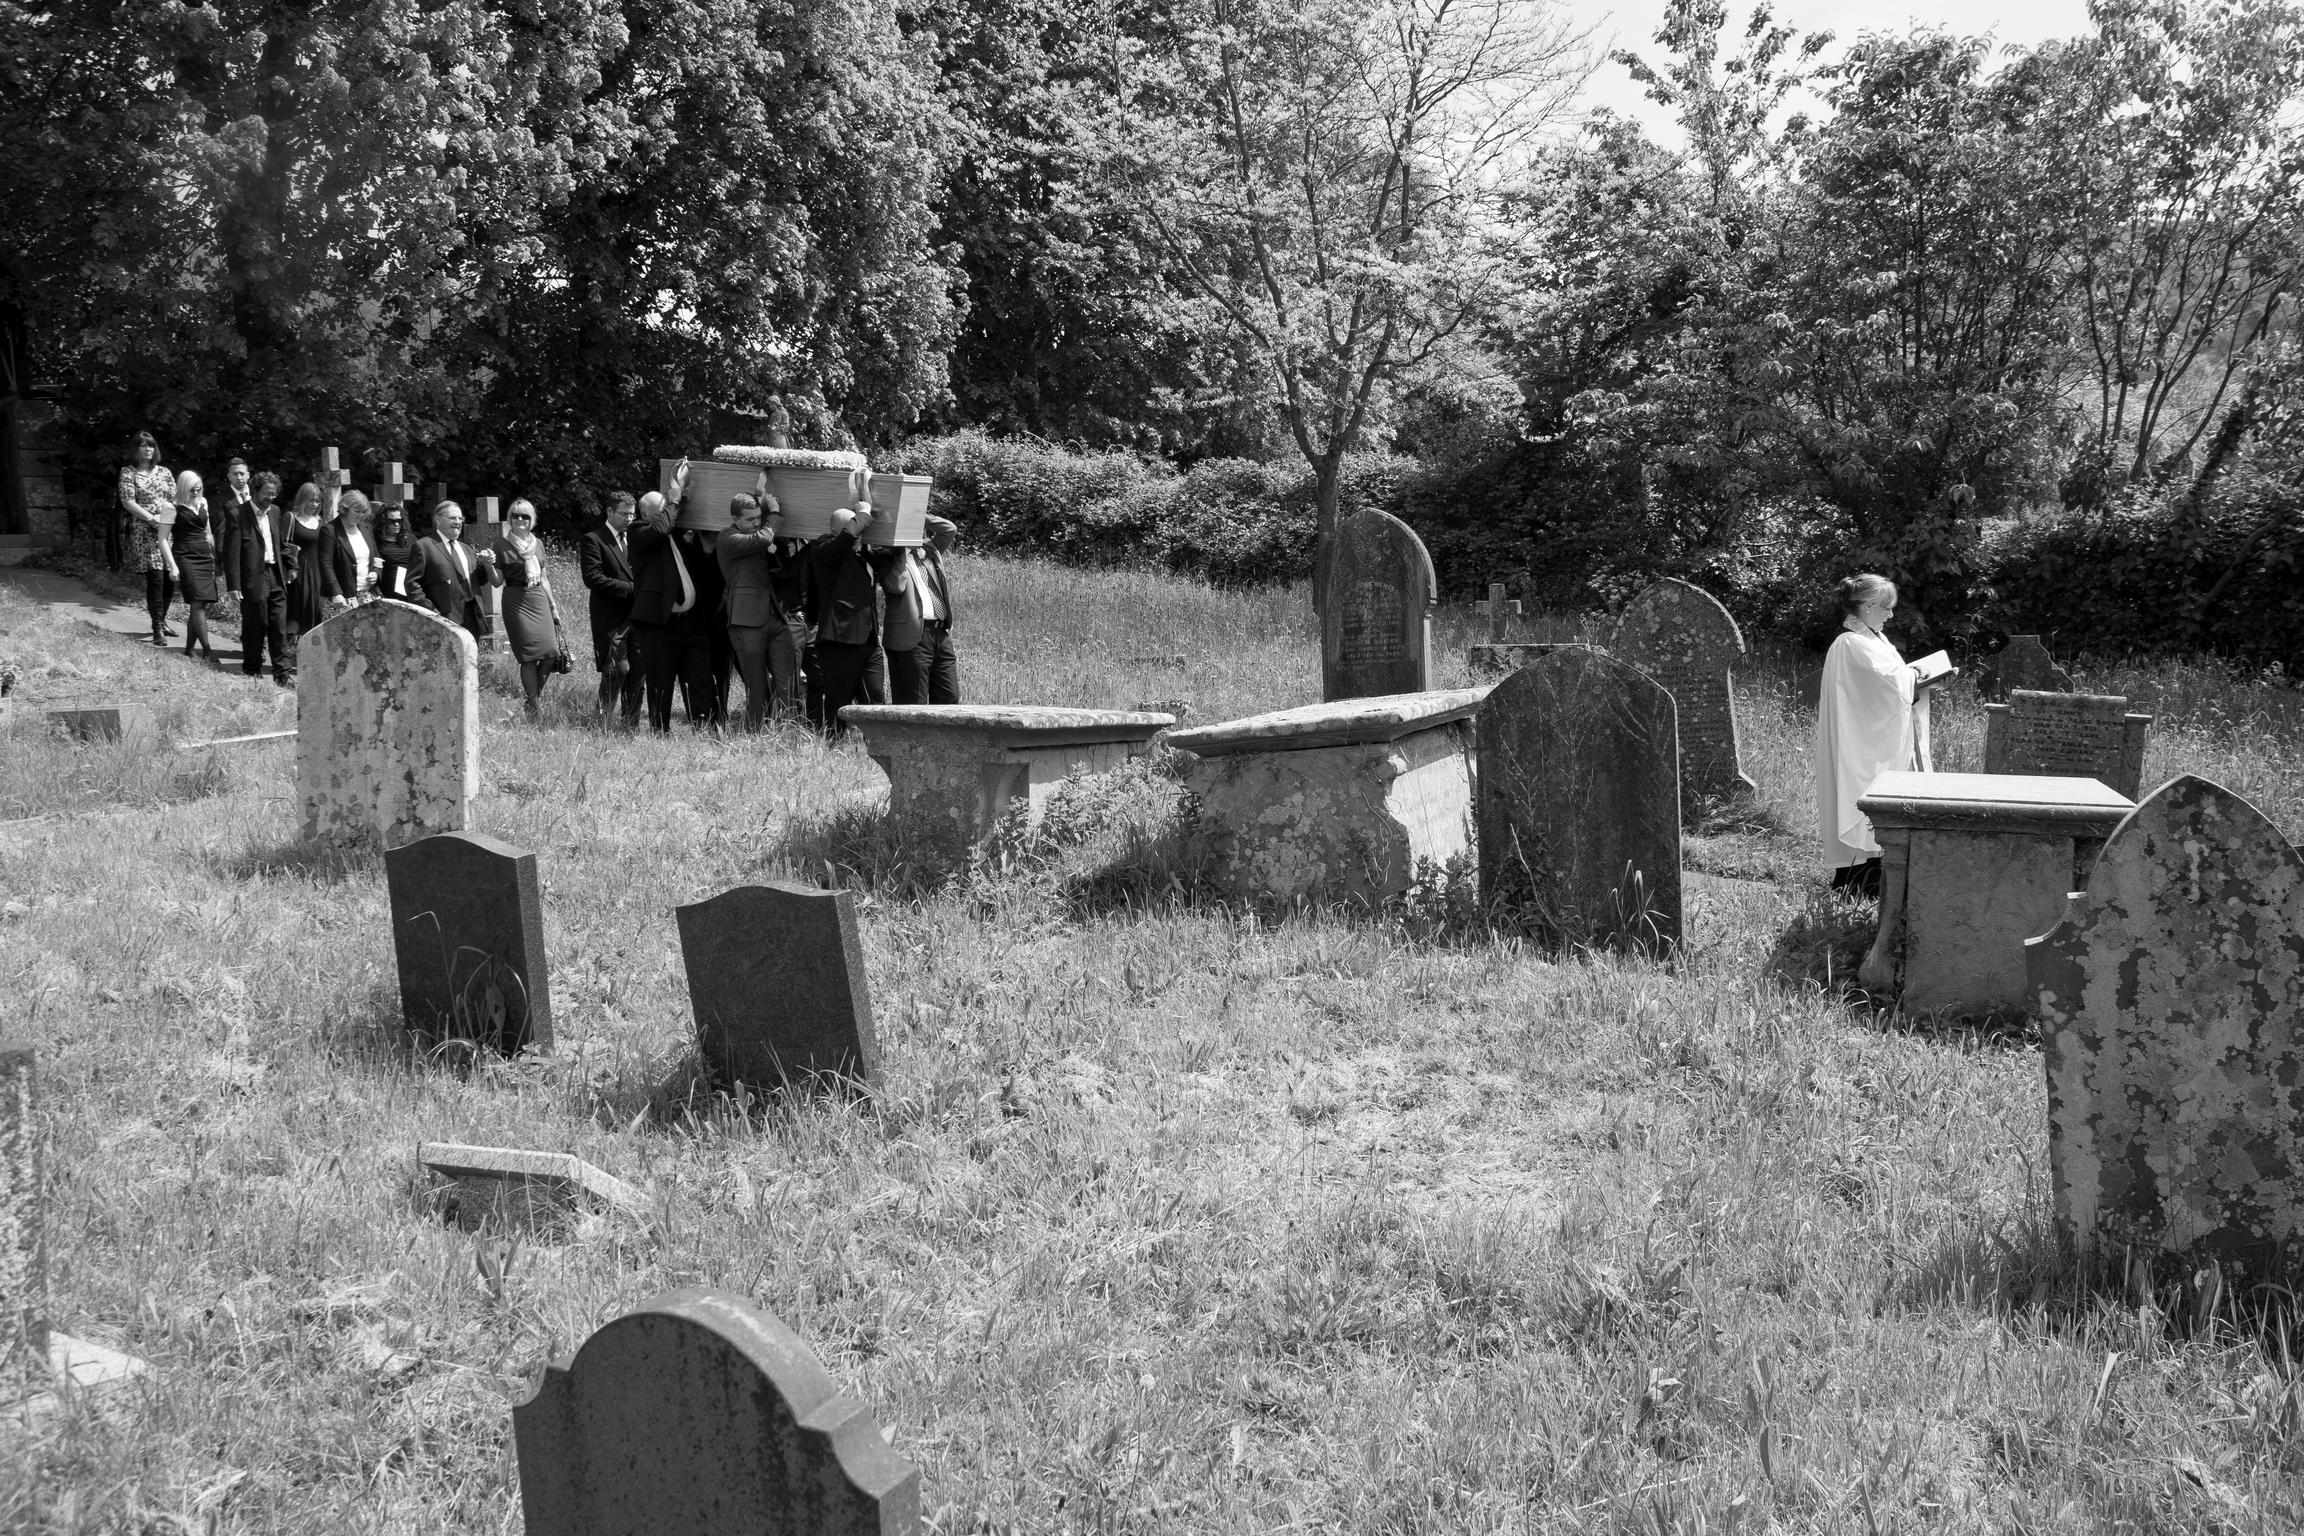 Funeral of John Christopher Allen at St Michael's Church. Tintern, Wales